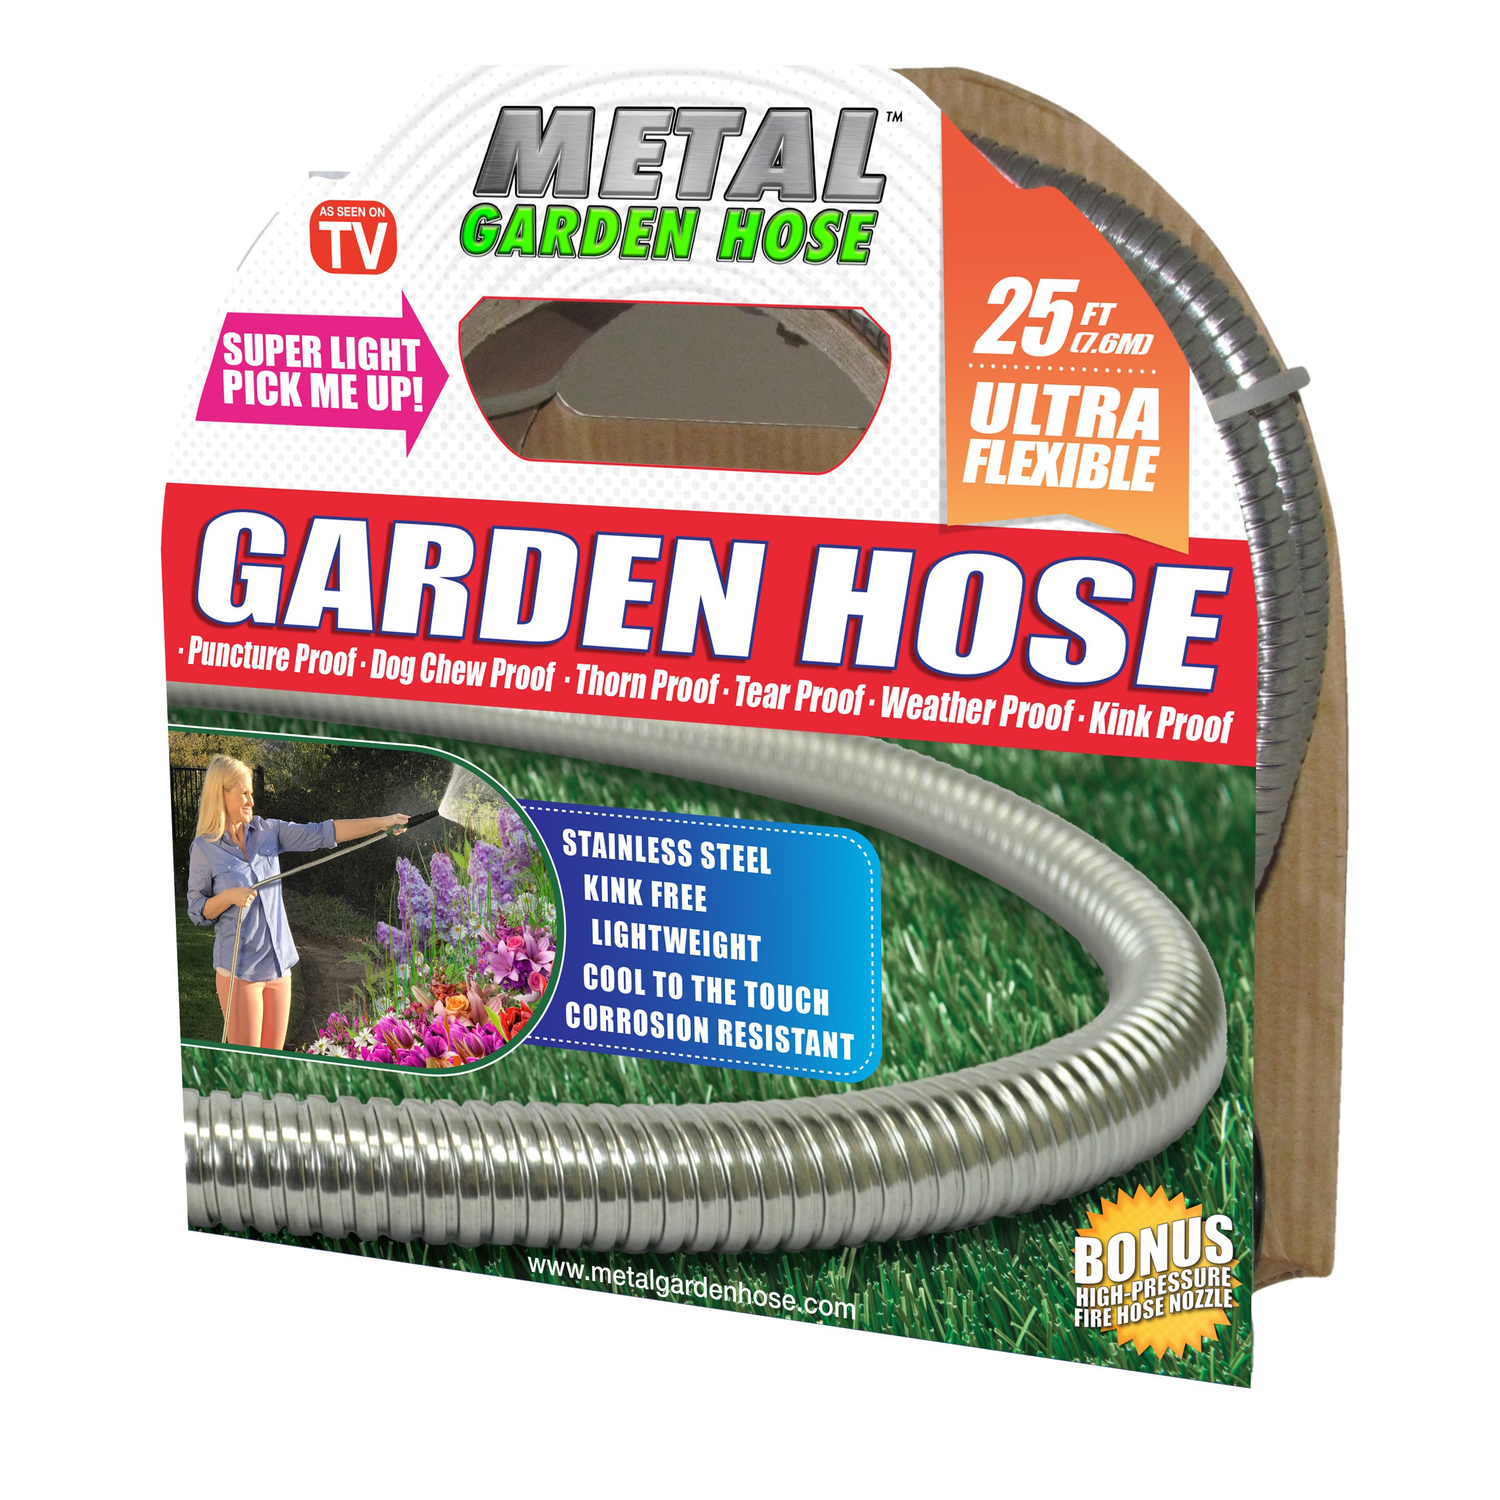 Details about   Flexible Metal Garden Hose Upgrade Leak and Fray Resistant Design Stainless Lawn